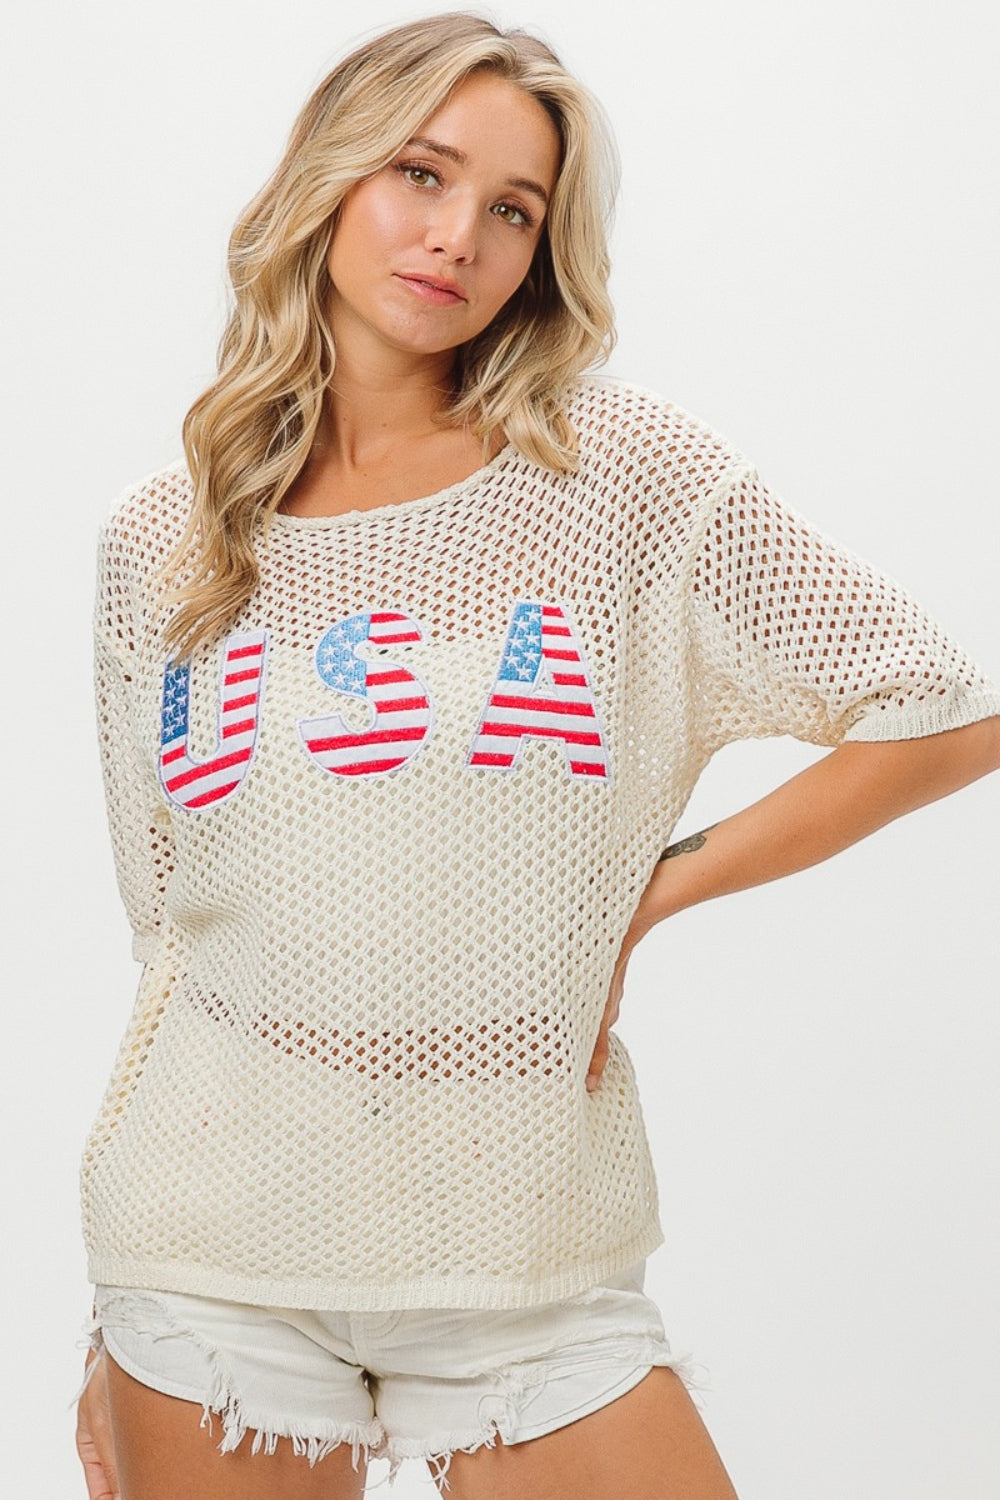 Explore More Collection - BiBi US Flag Theme Knit Cover Up